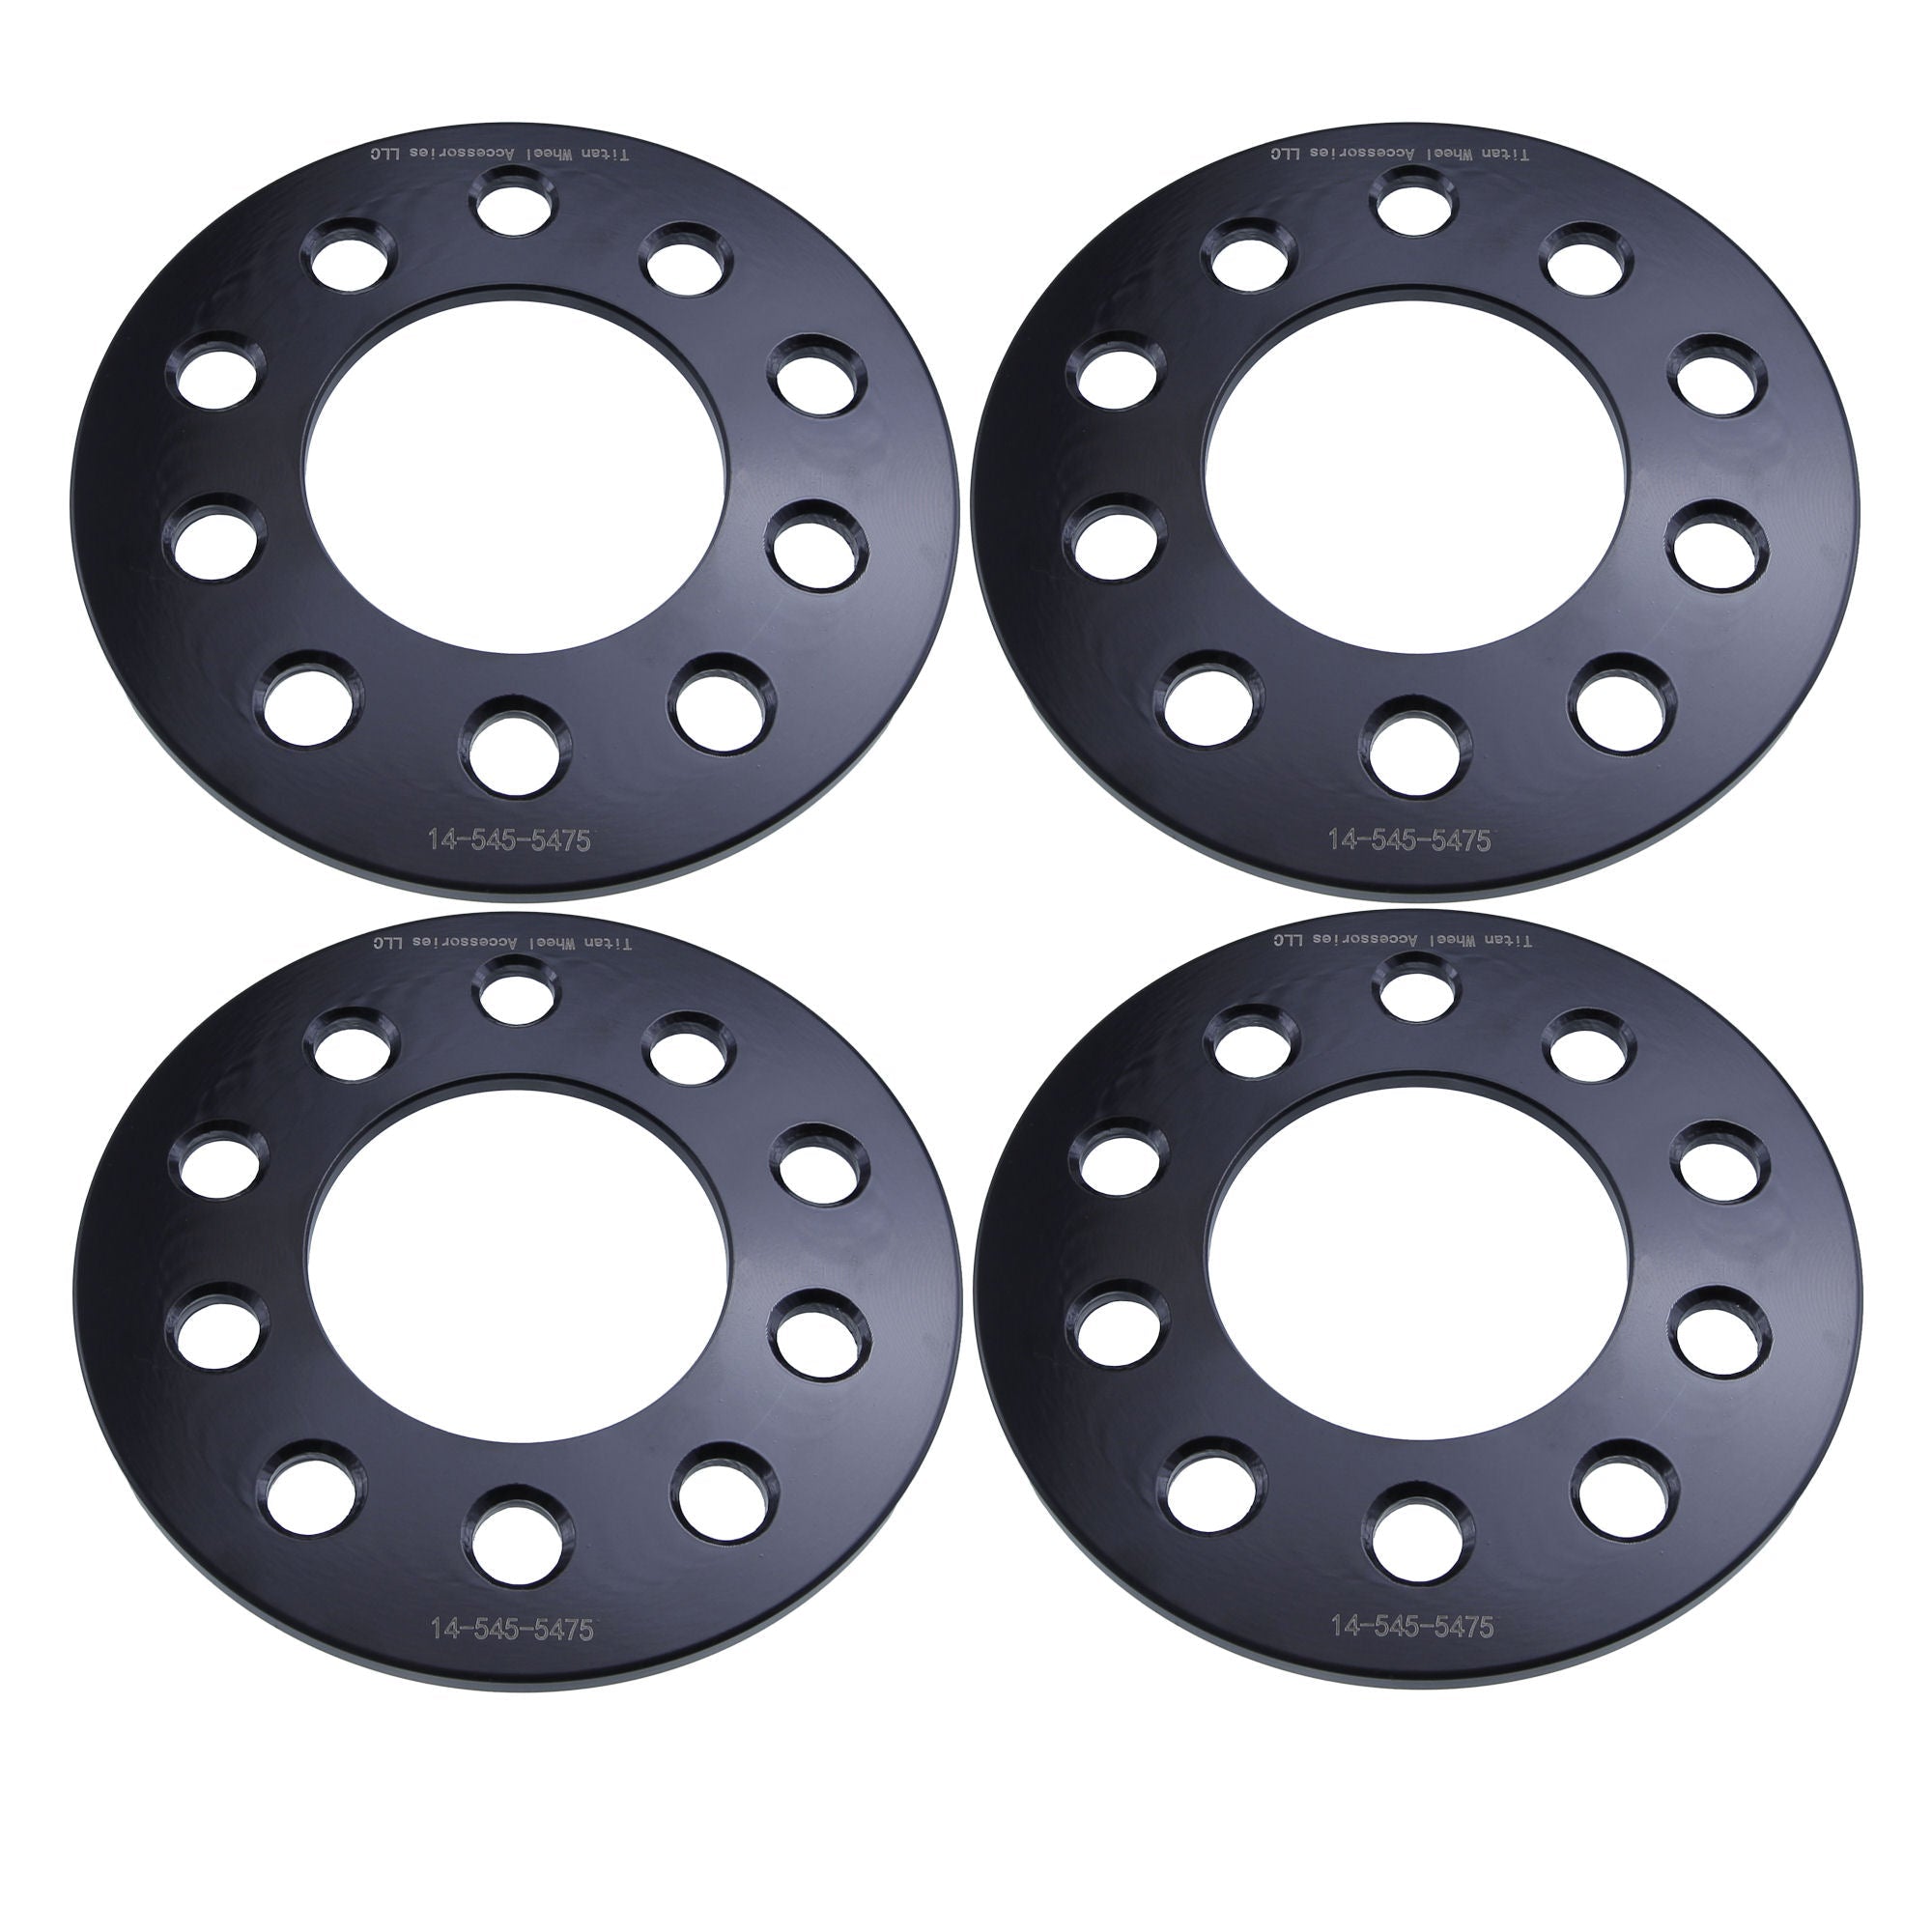 1/4 Inch Wheel Spacers for Ford Mustang Ranger Explorer | 5x4.5